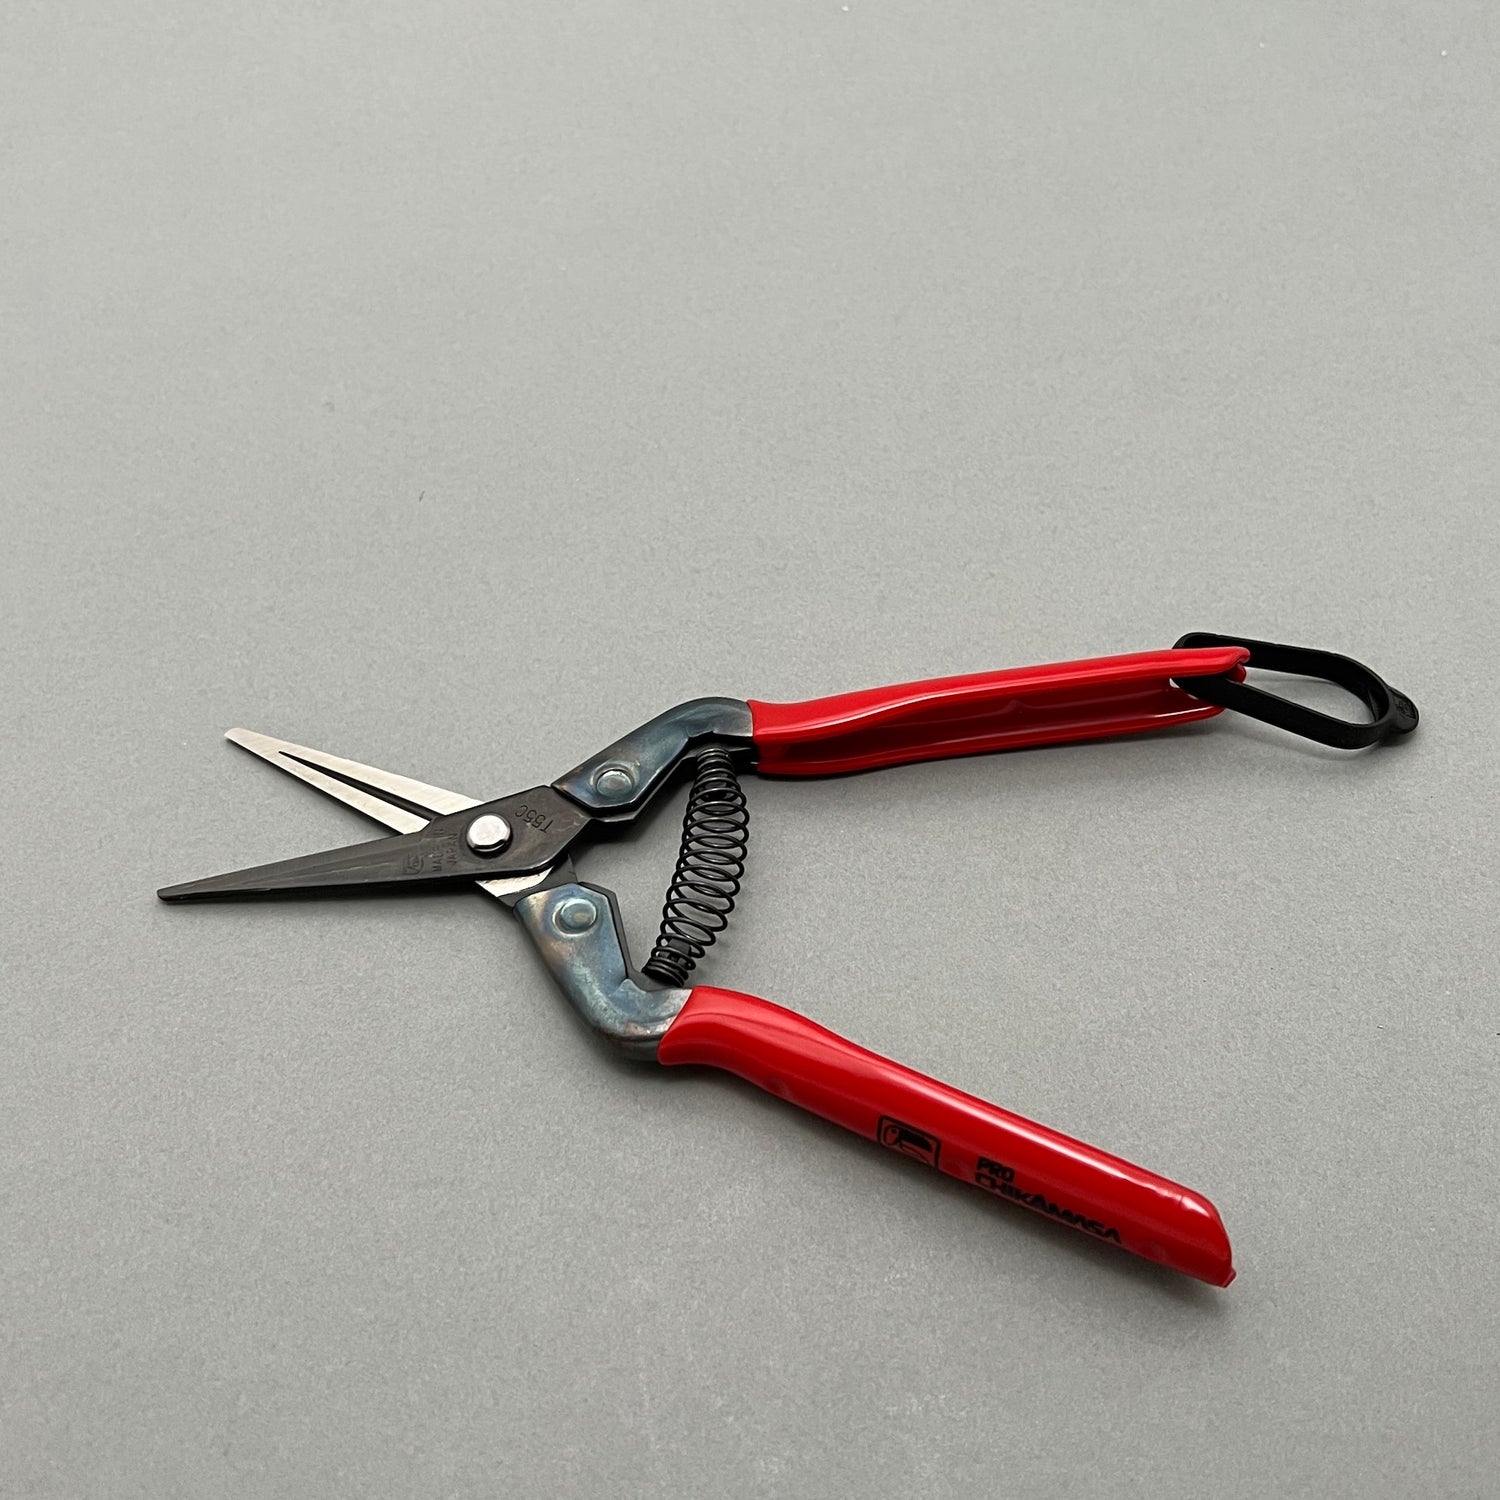 A pair of Chikamasa T-55C pruning shears with a red handle in open position laying on a gray background